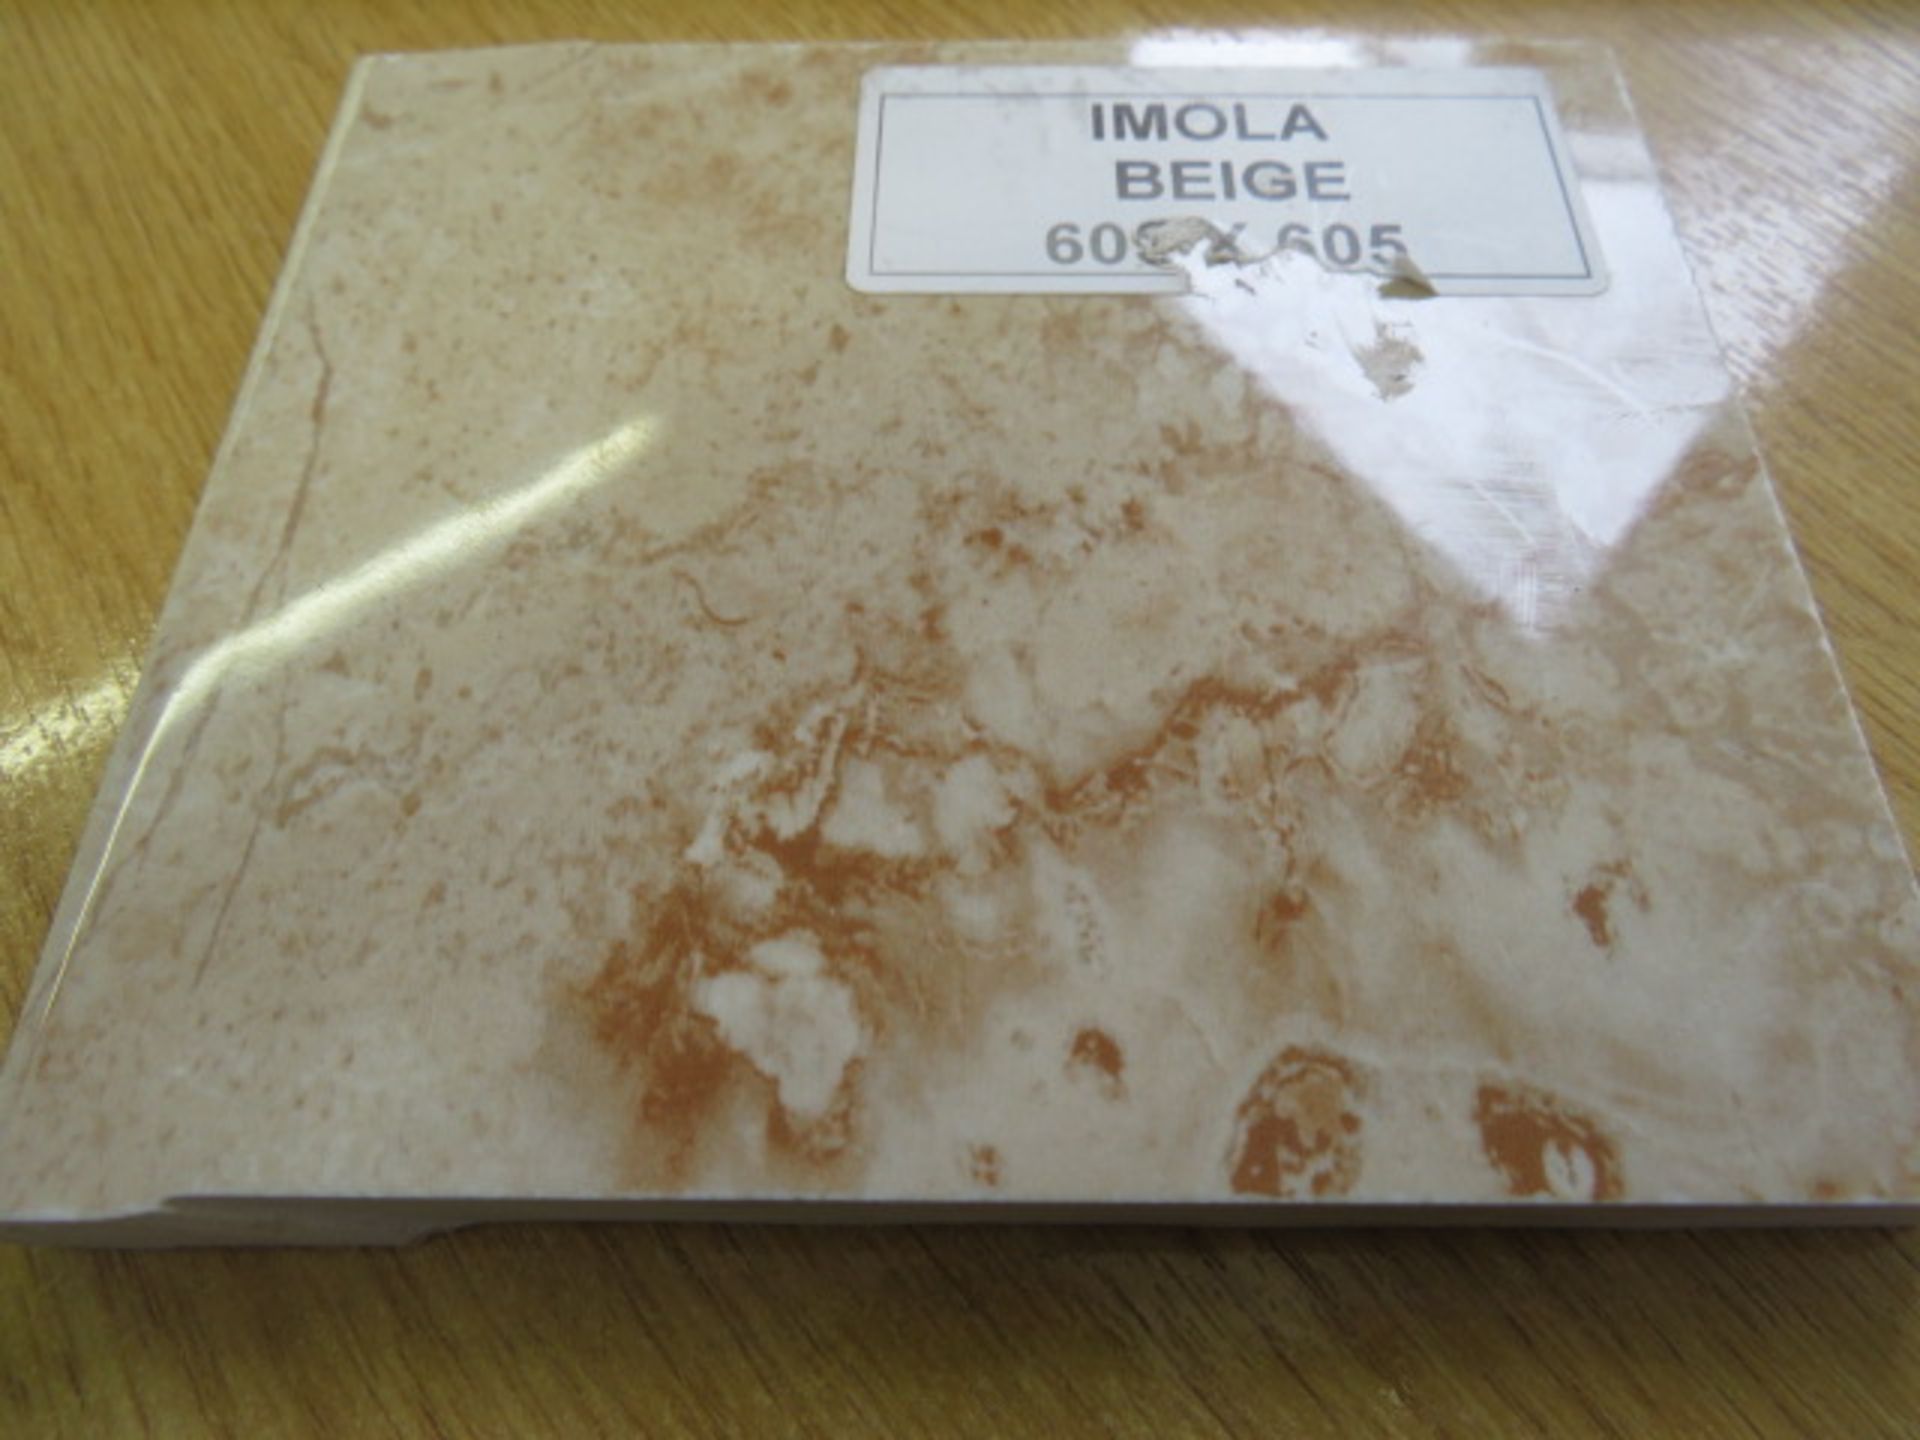 NEW 8.76 Square Meters of Imola Beige Wall and Floor Tiles. 605x605mm per tile, 10mm thick. T... - Image 4 of 4